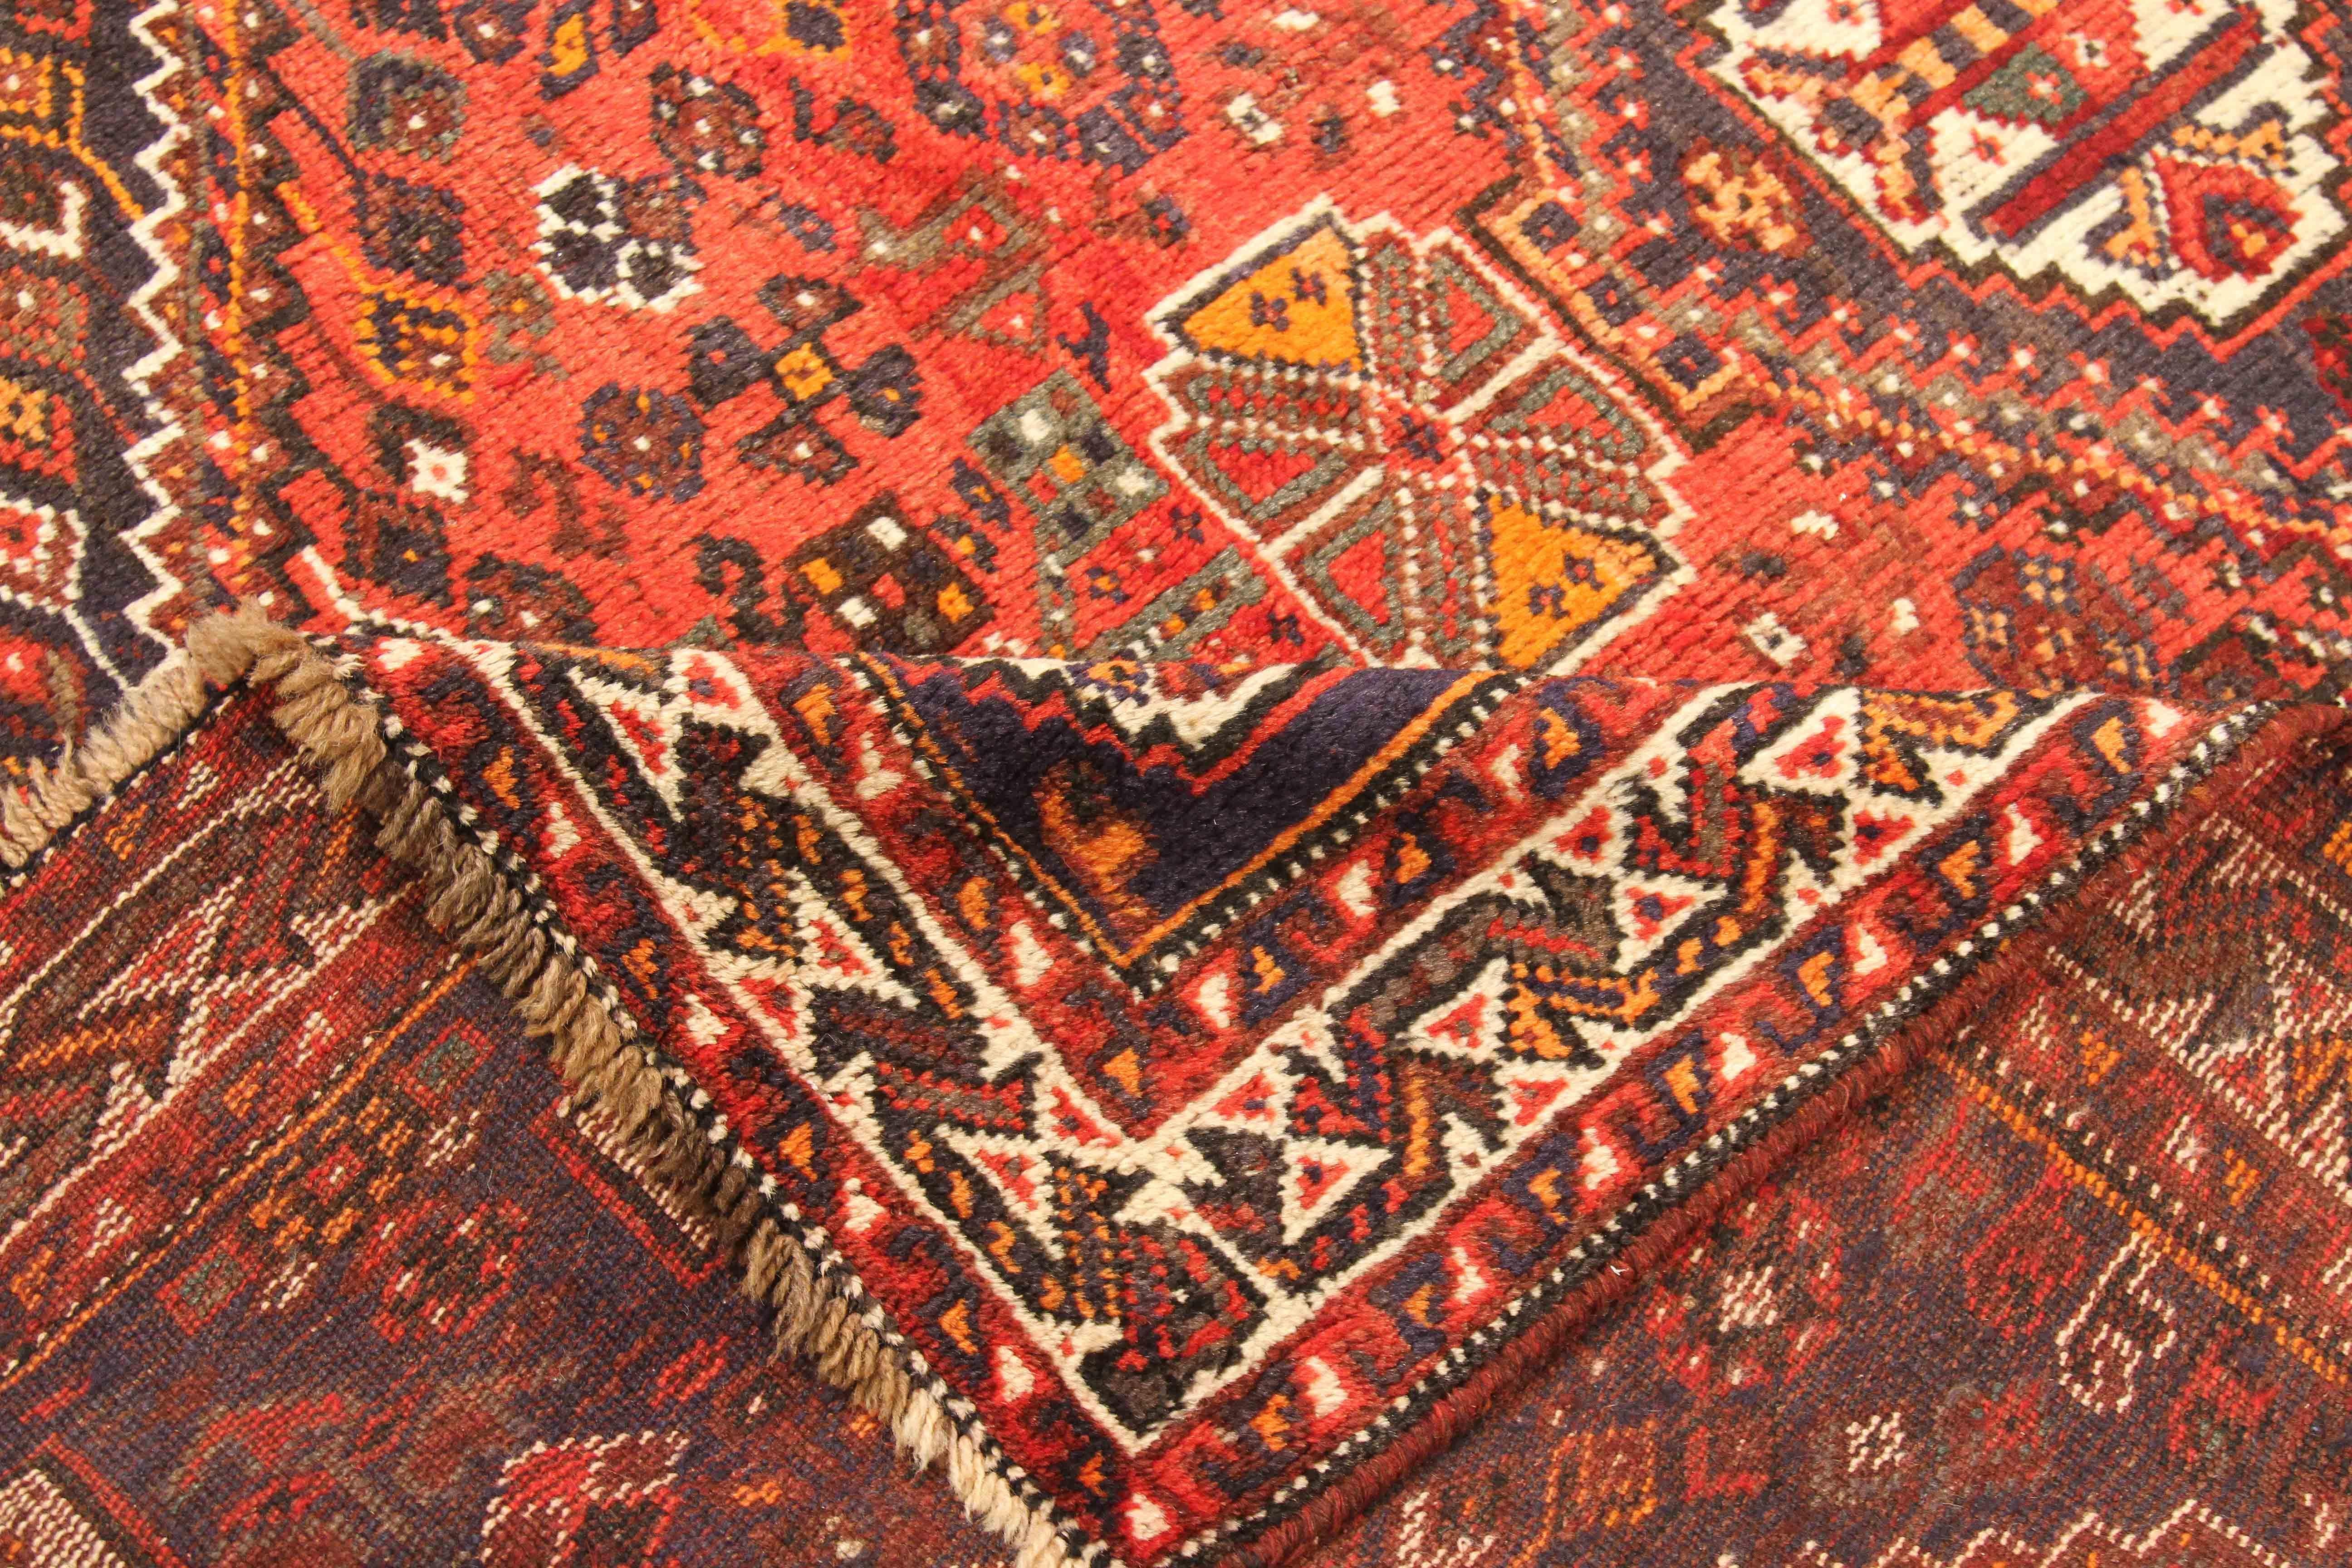 Other Antique Persian Shiraz Rug with Red and White Geometric Details on Black Field